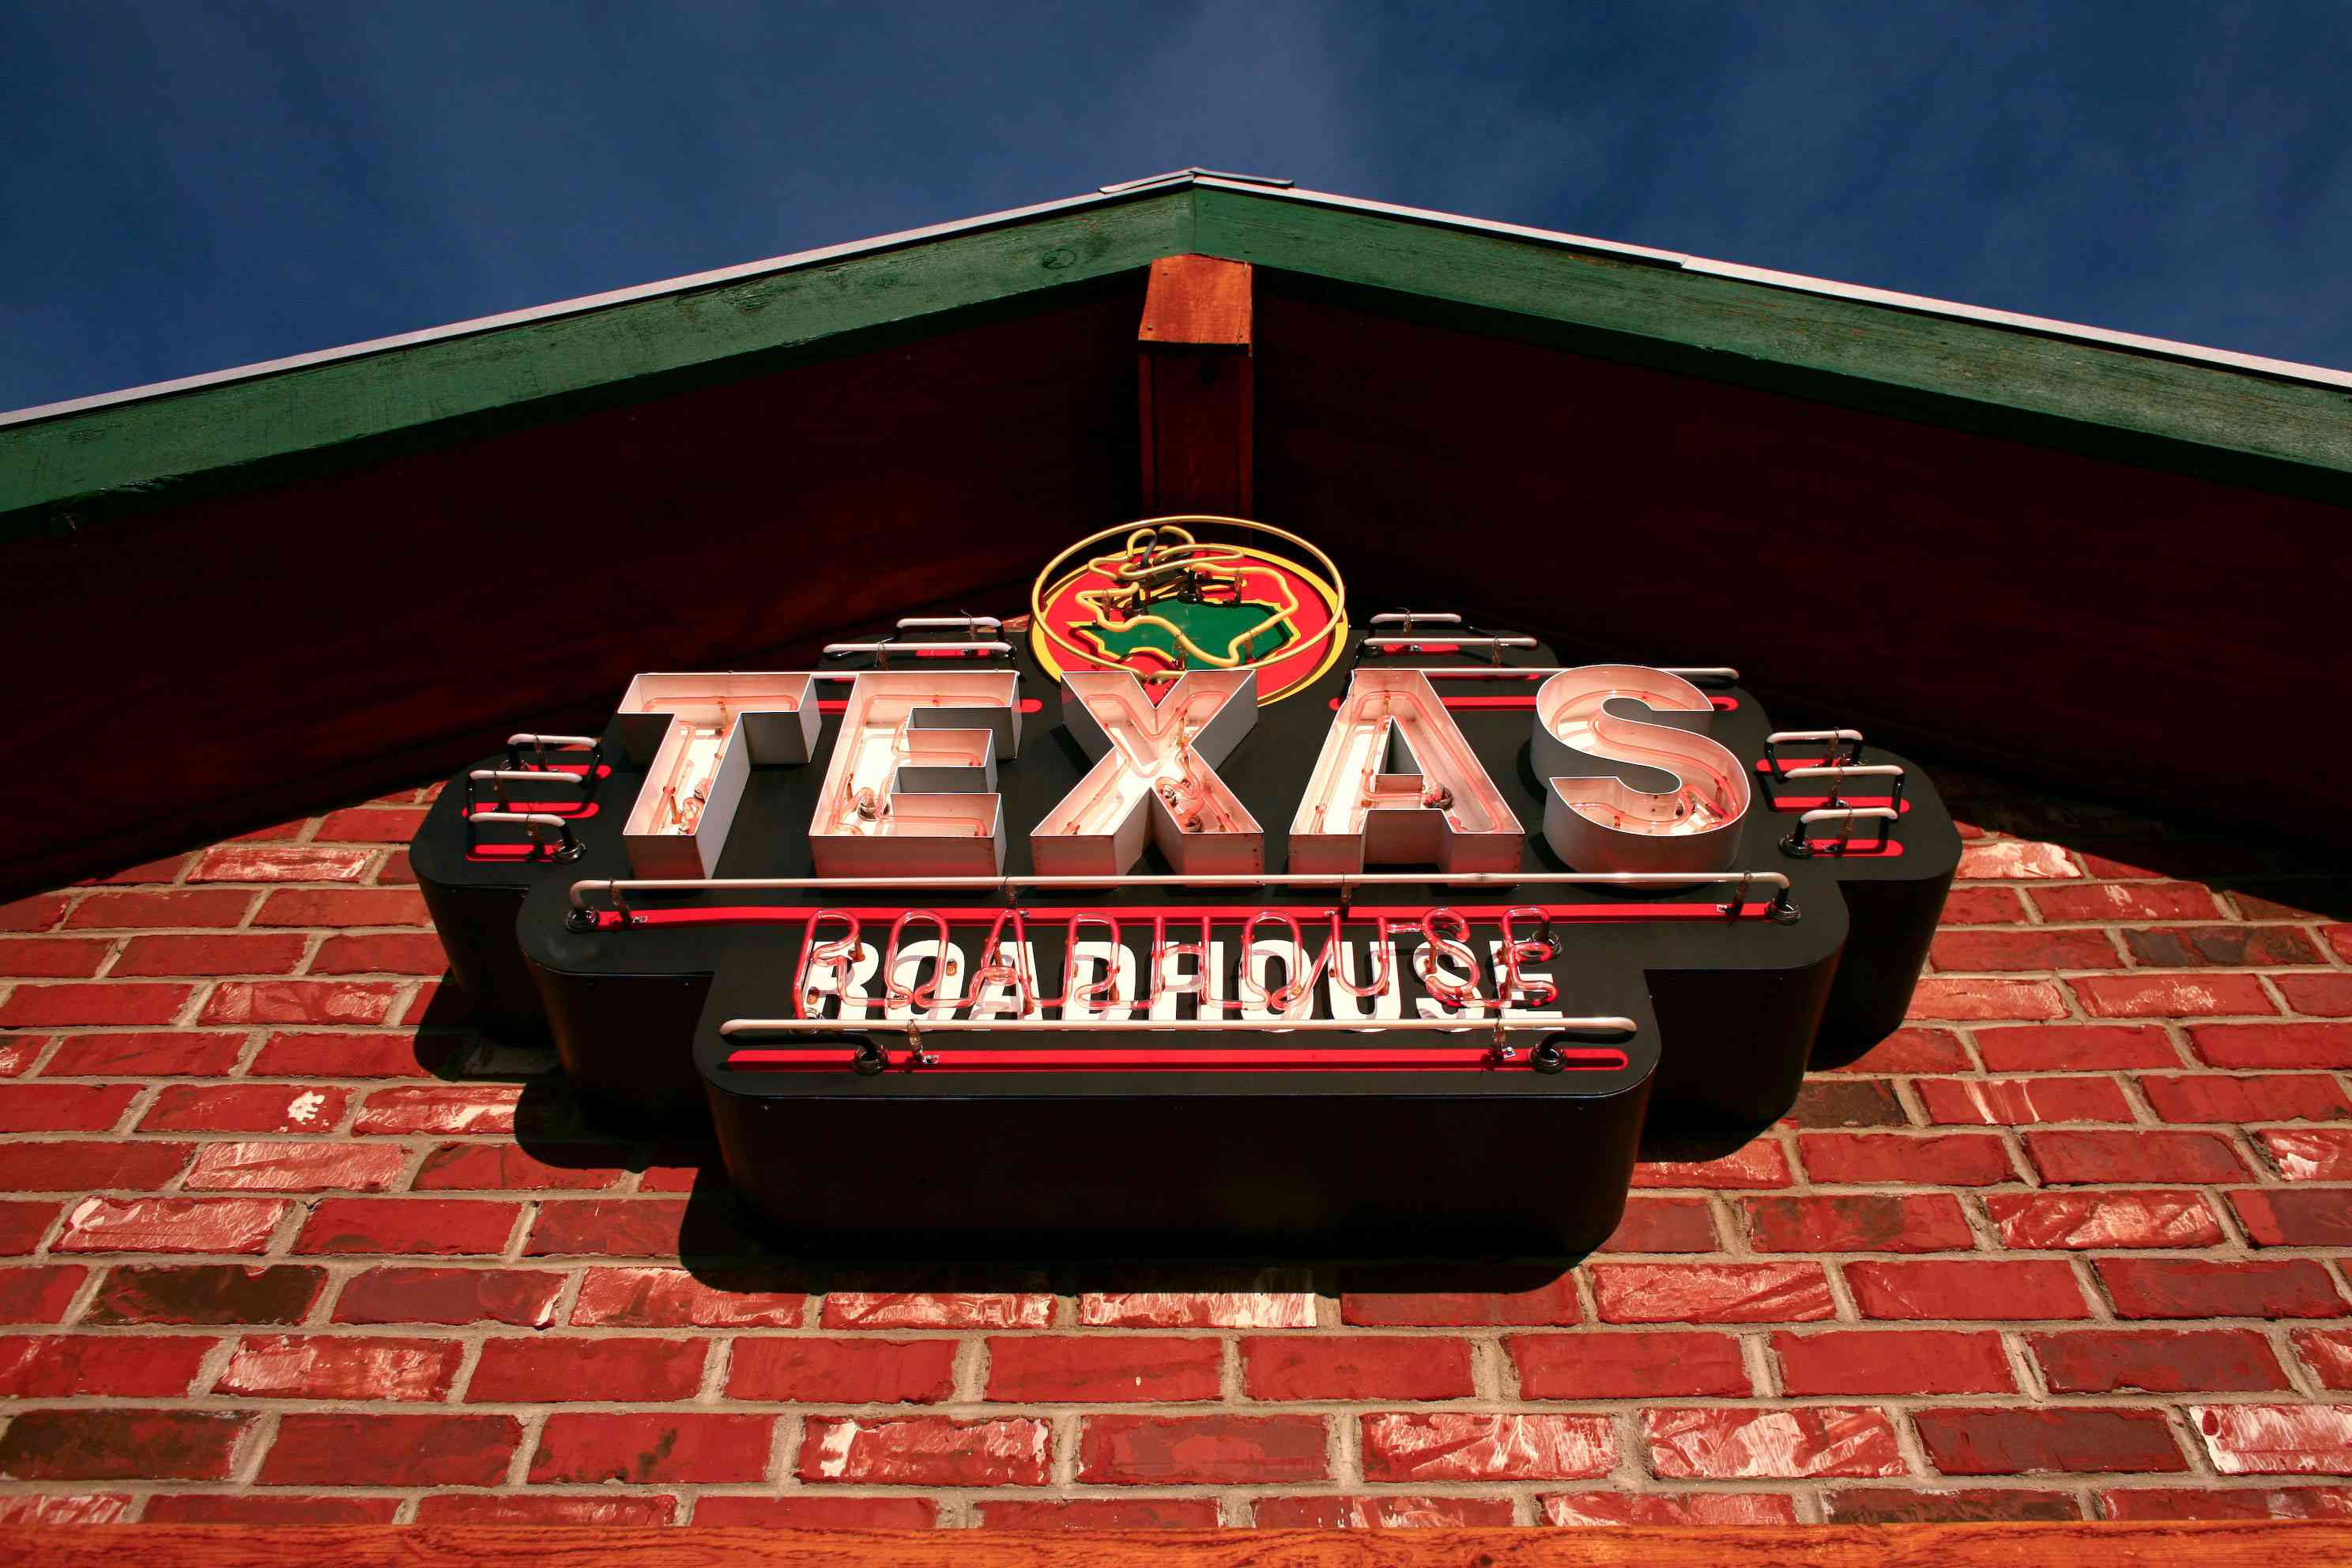 texas roadhouse's meal pack easily feeds a family of 4 for around $40